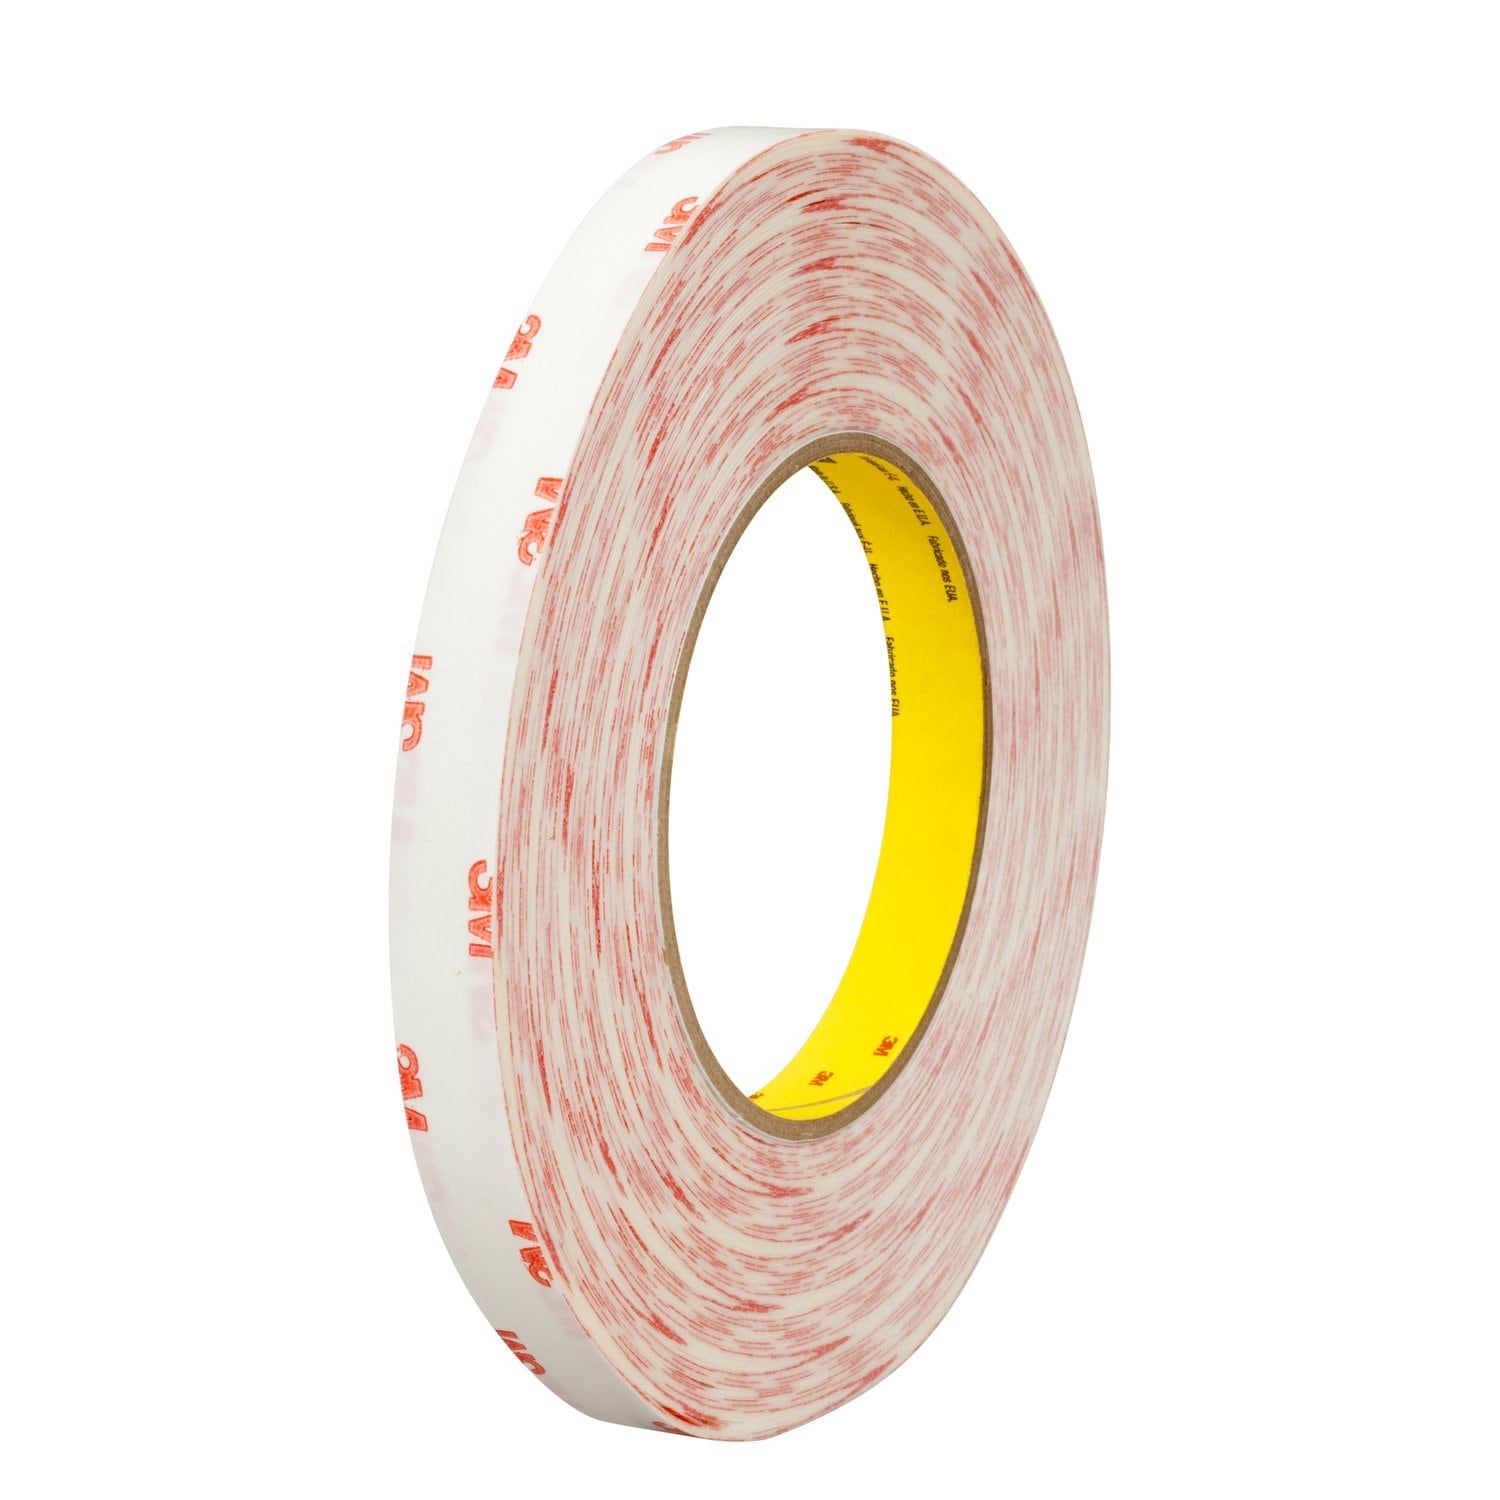 7010312376 - 3M Double Coated Tissue Tape 9456, Clear, 1/2 in x 72 yd, 4 mil, 72
rolls per case